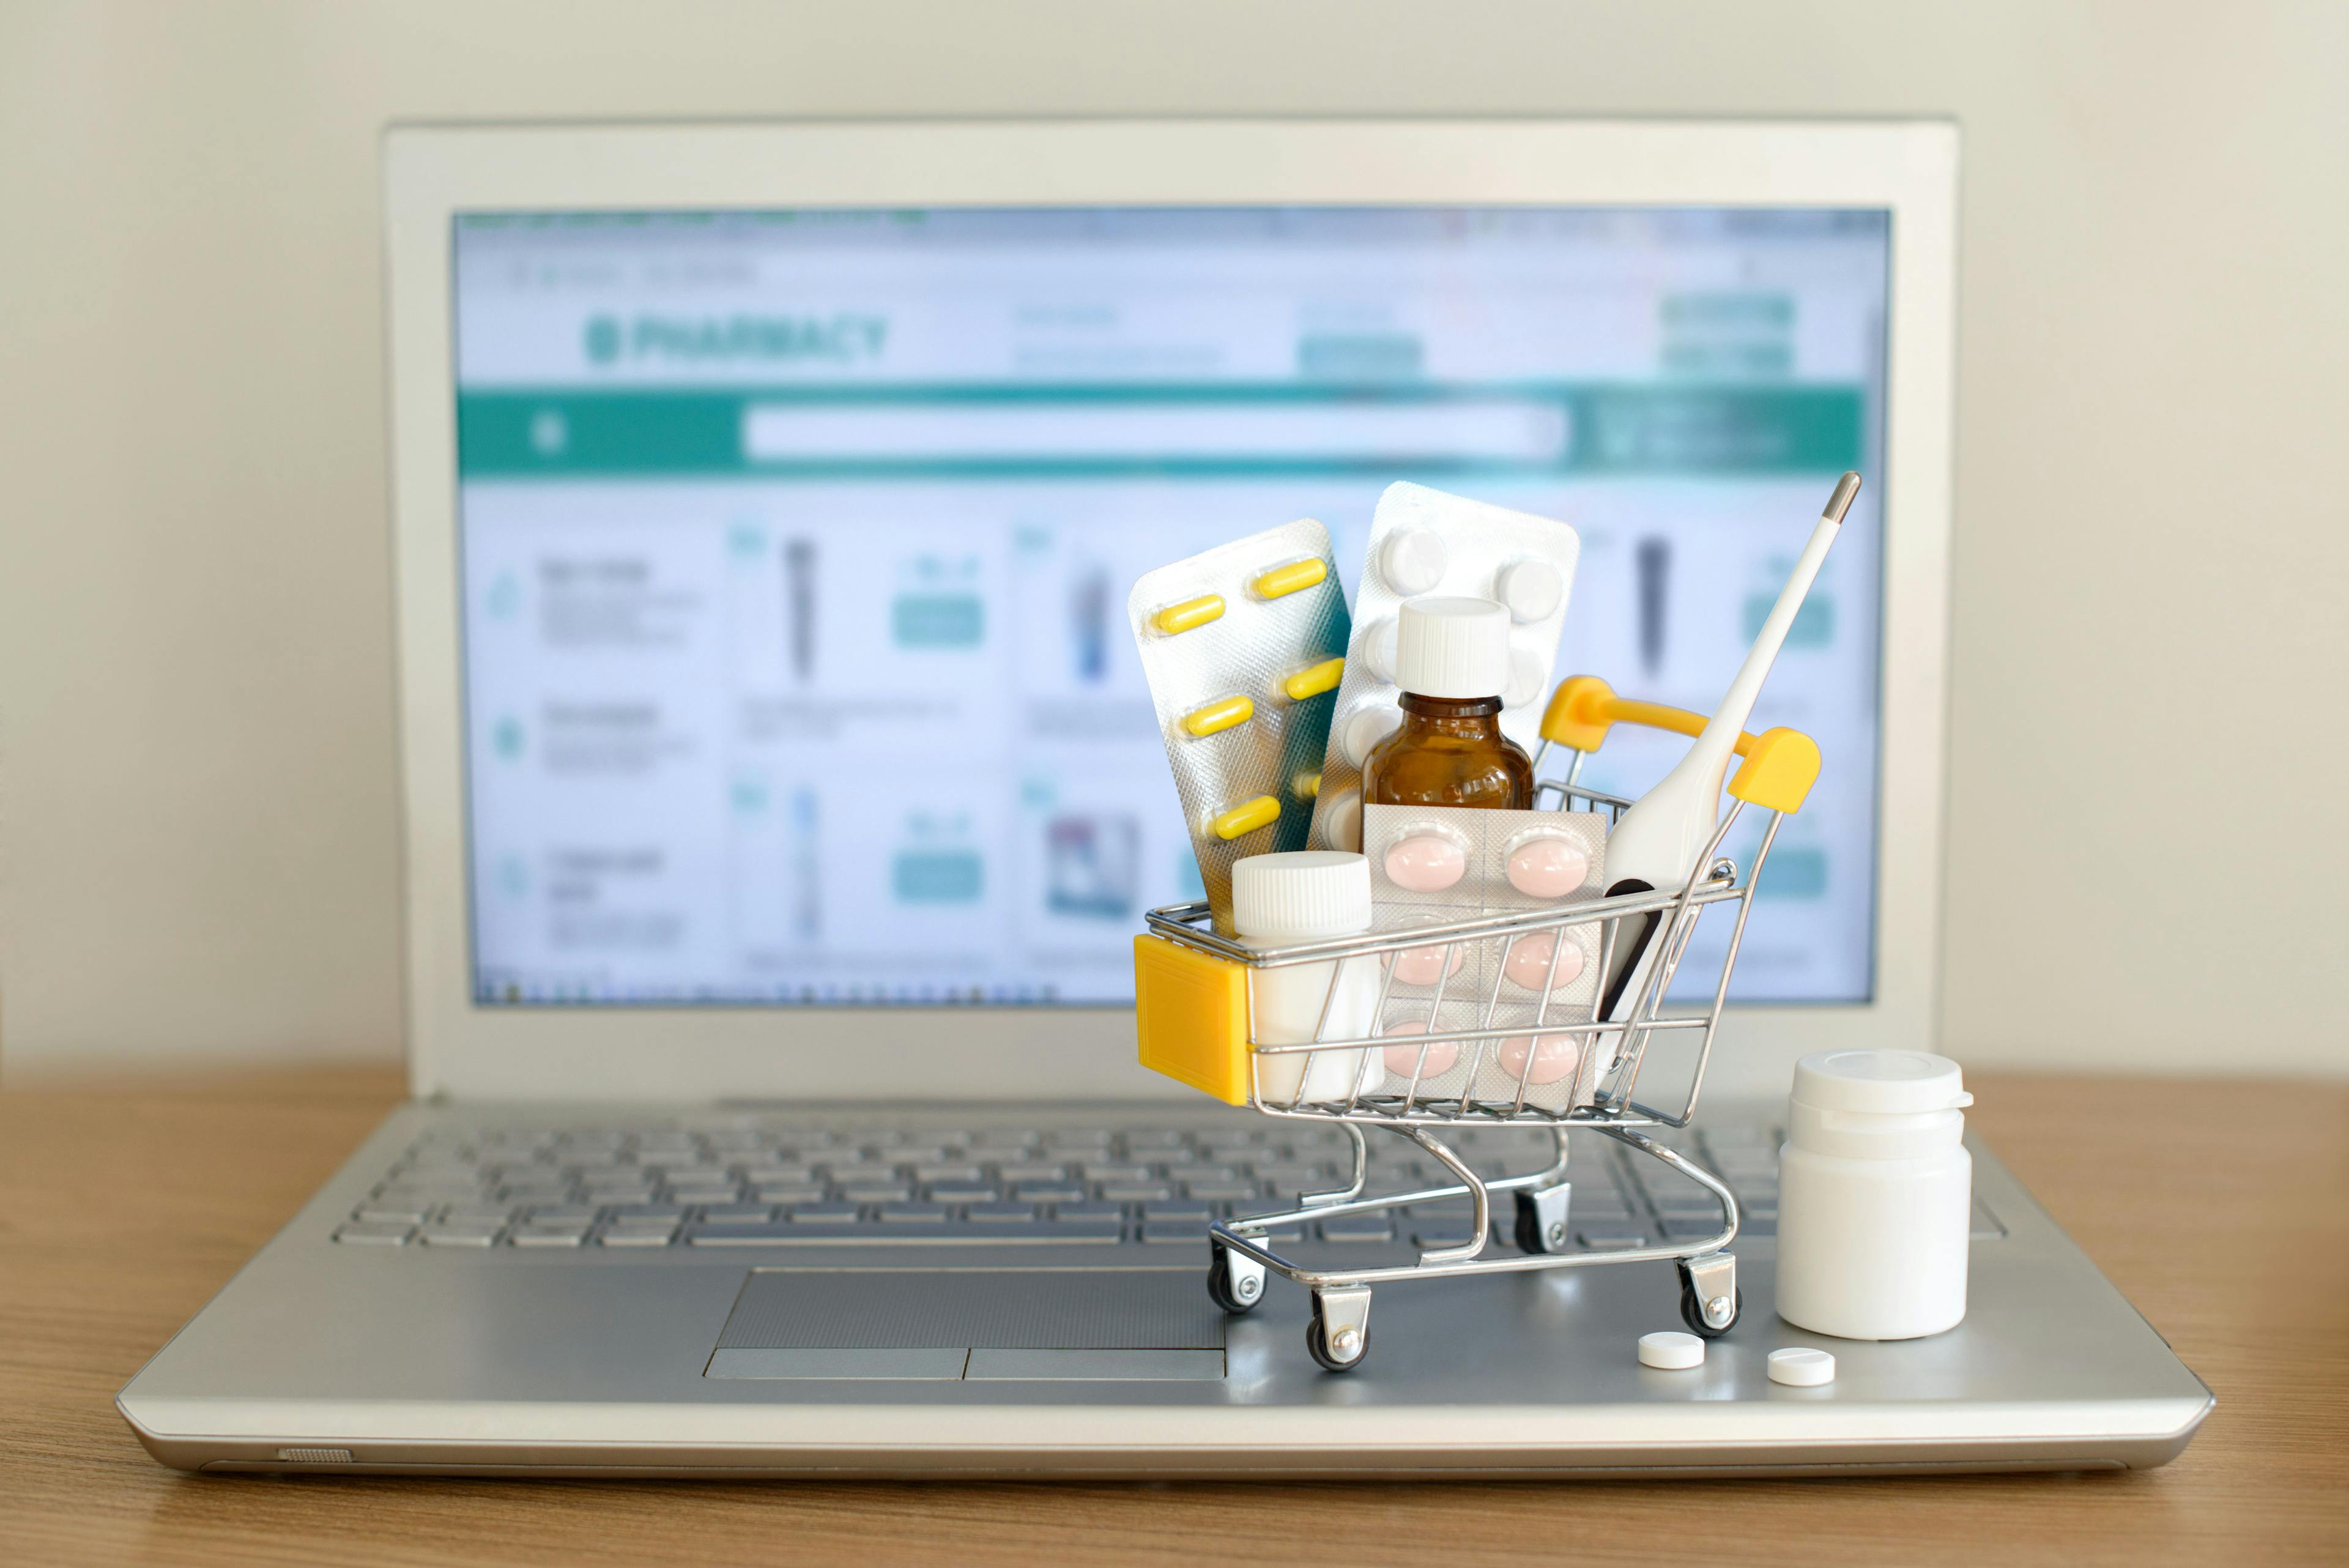 Shopping cart toy with medicaments in front of laptop screen with pharmacy web site on it. Pills, blister packs, medical bottles, thermometer set. Health care and internet shopping. Image Credit: Adobe Stock Images/evso